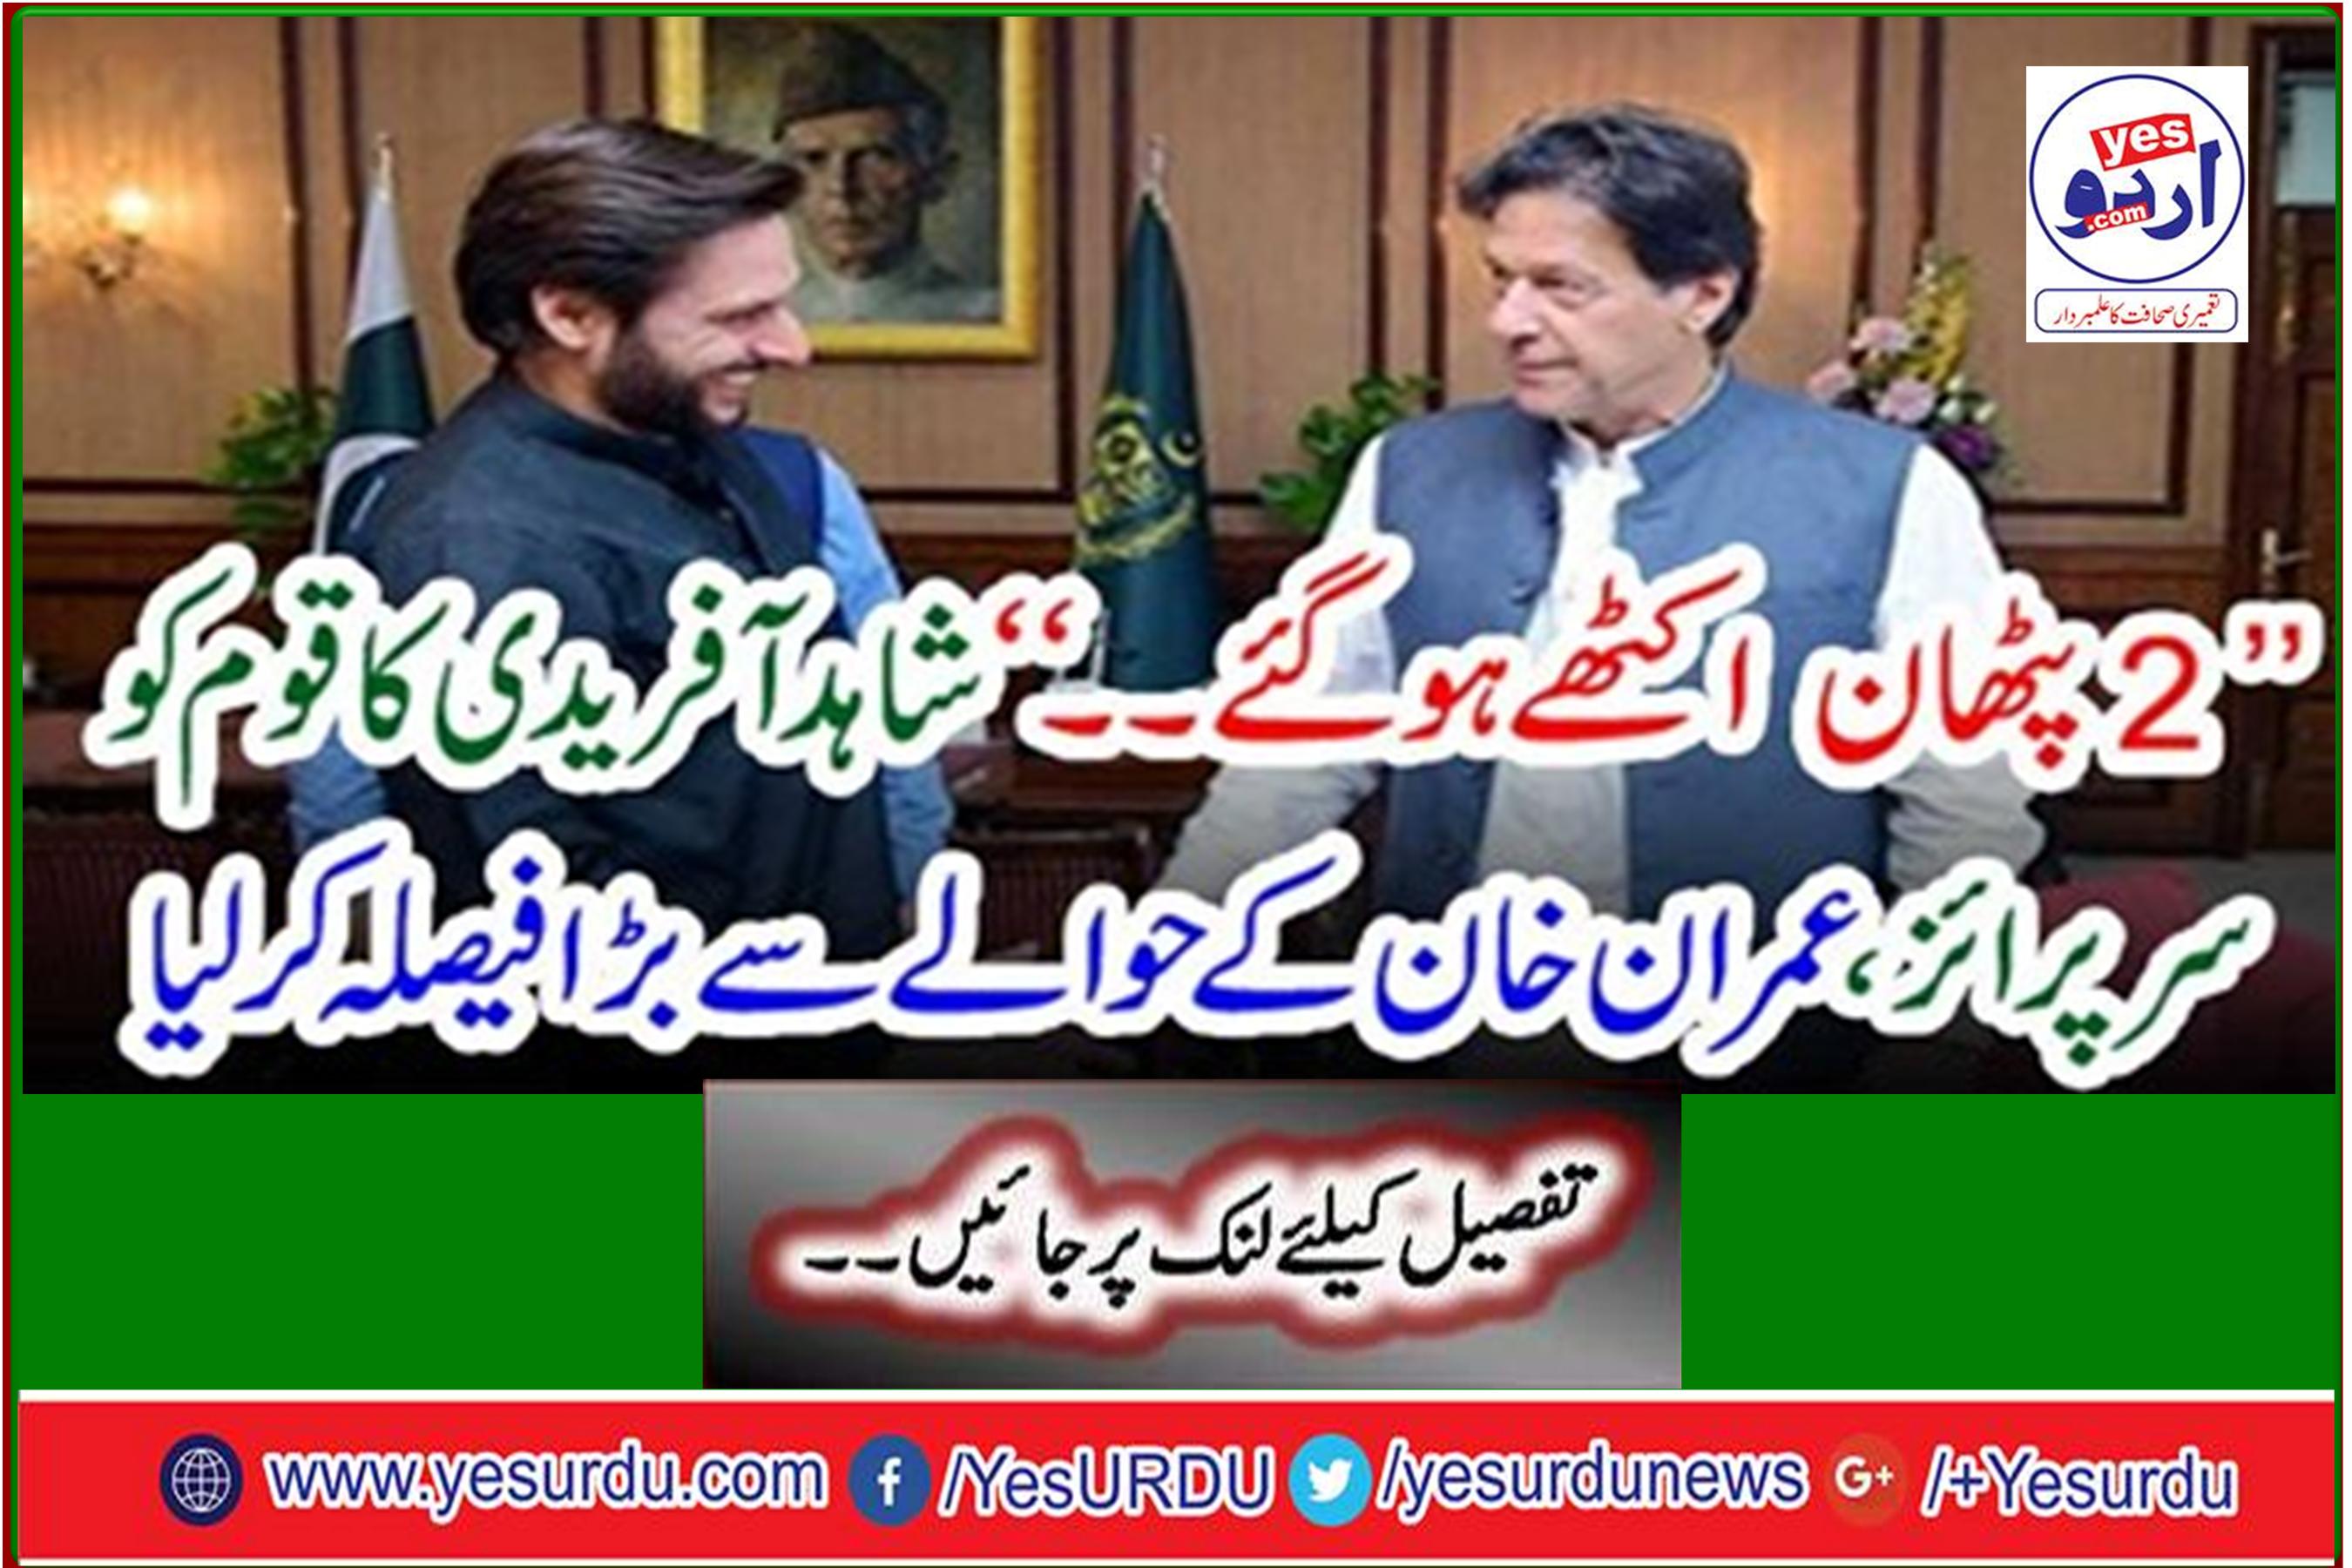 "2 Pathans come together ... Shahid Afridi's decision to surrender the nation to Imran Khan